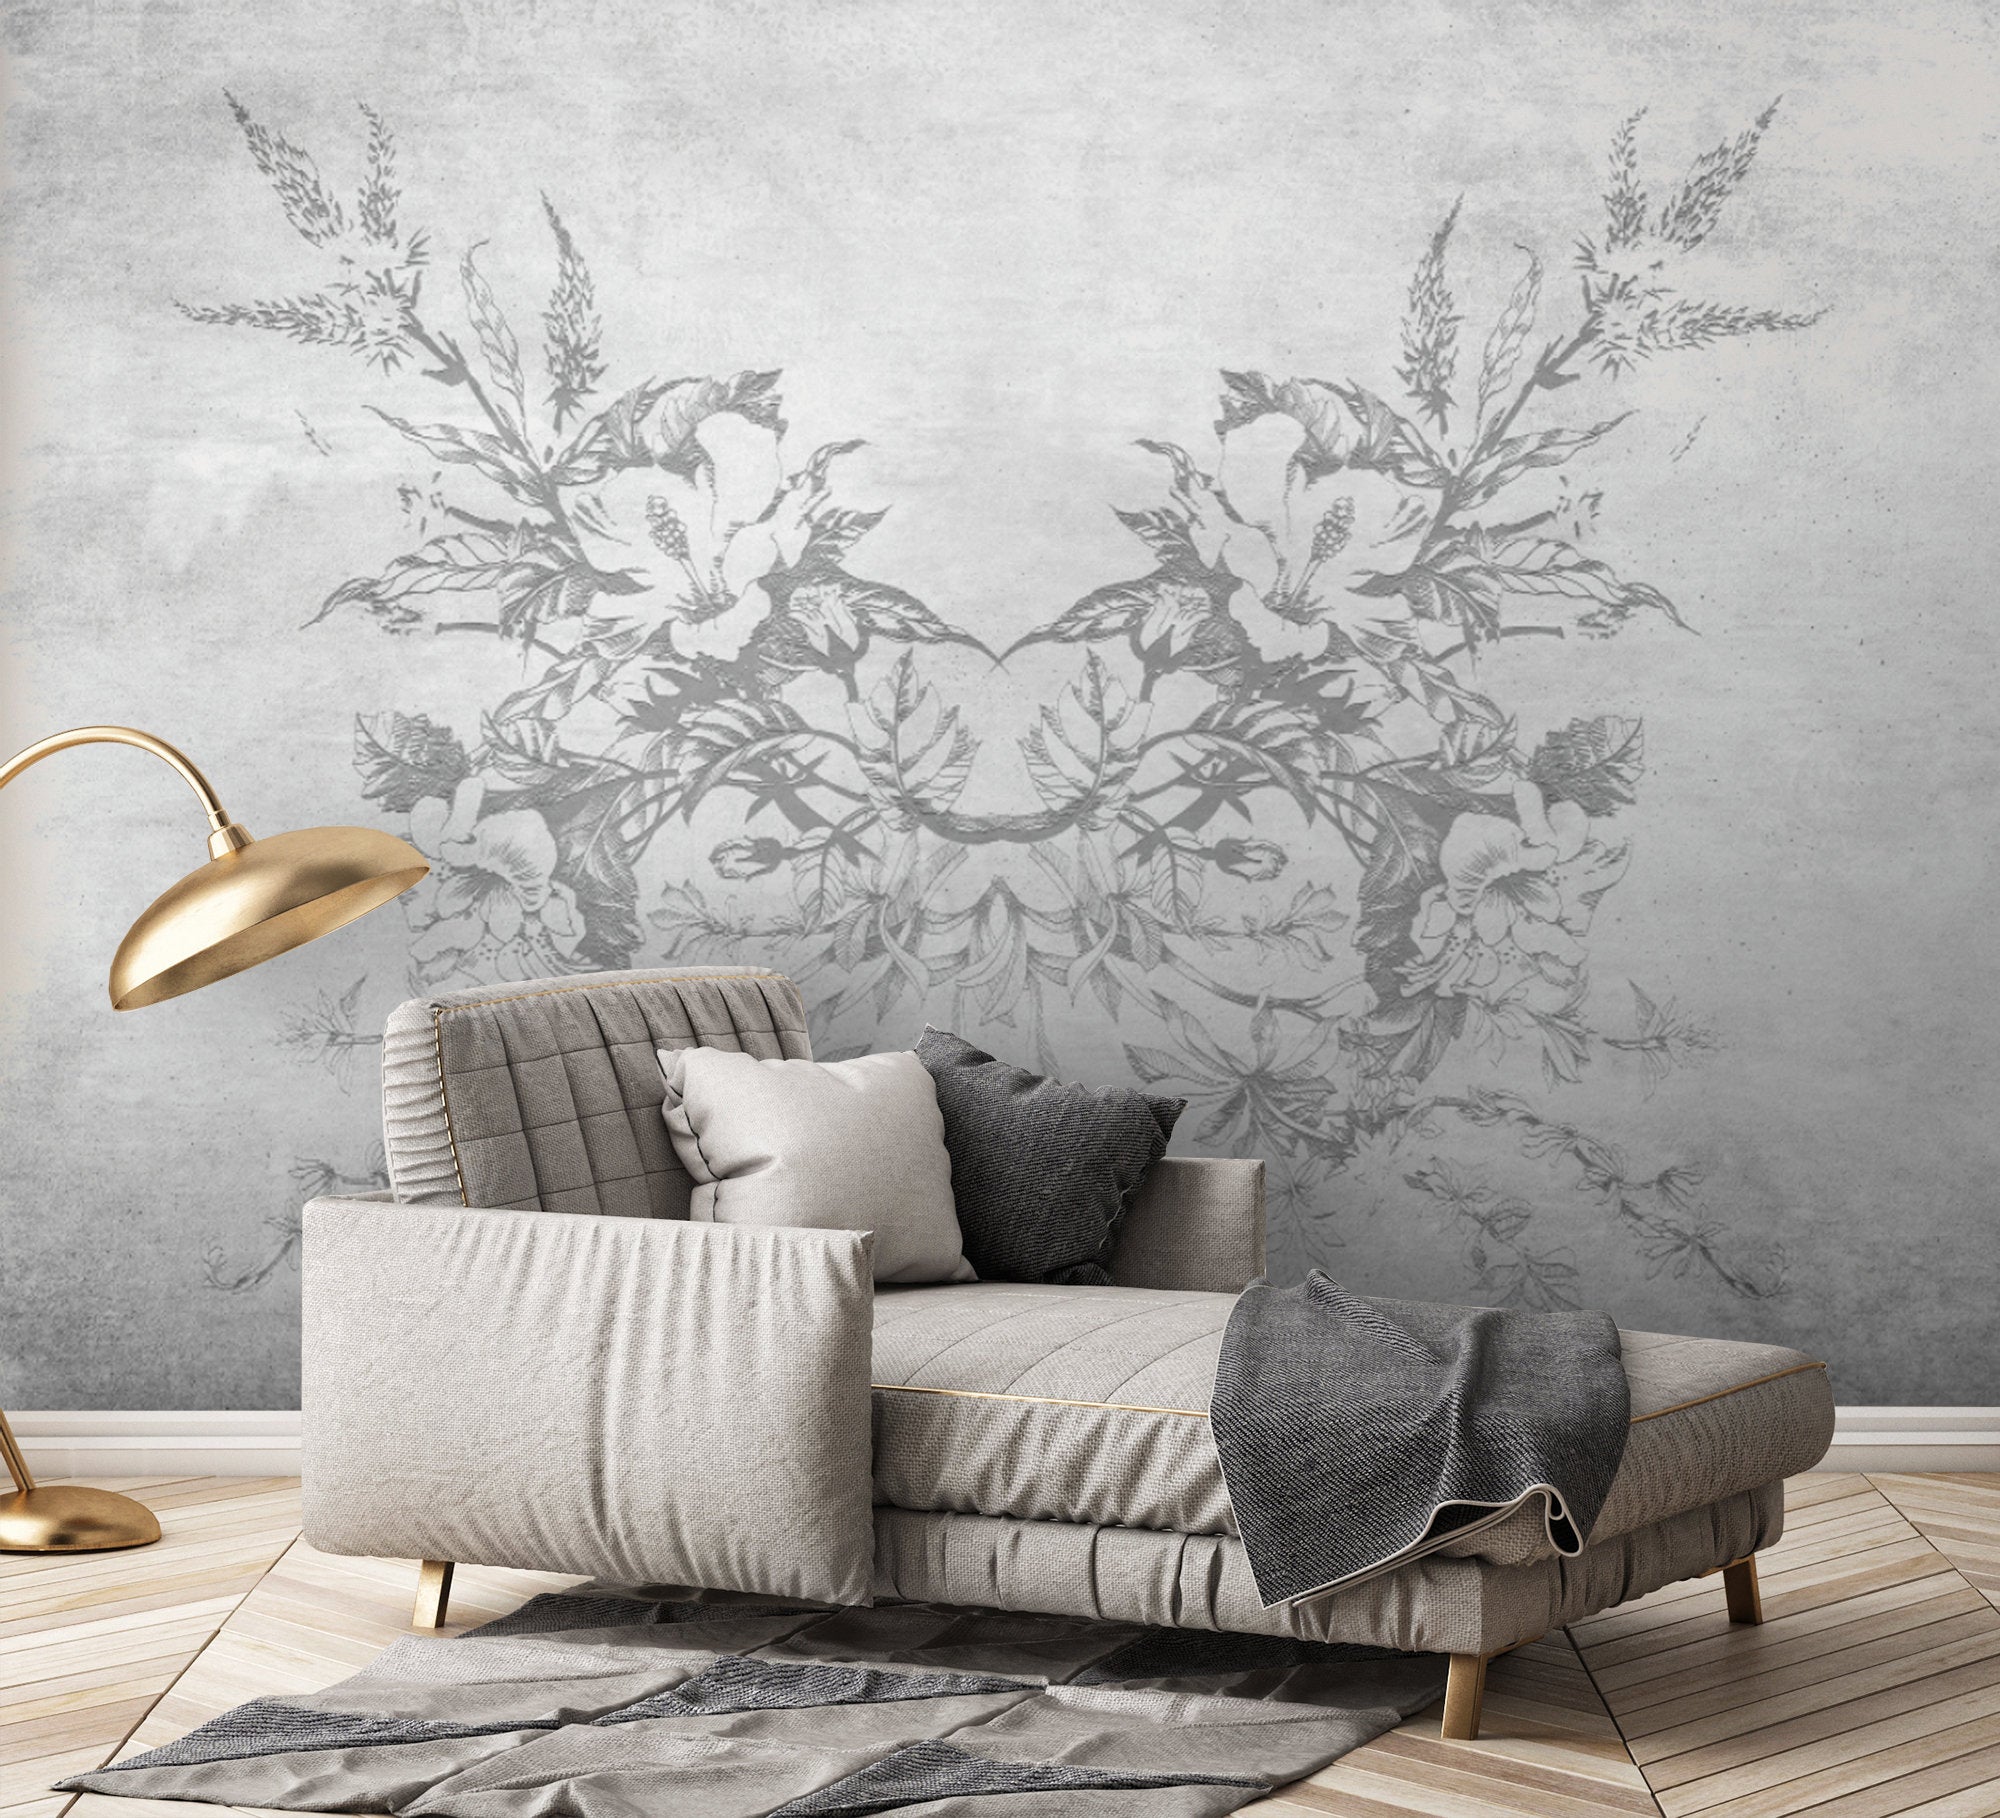 Abstract Flowers on the Gray Background Wallpaper Self Adhesive Peel & Stick Wall Sticker Wall Decoration Scandinavian Design Removable